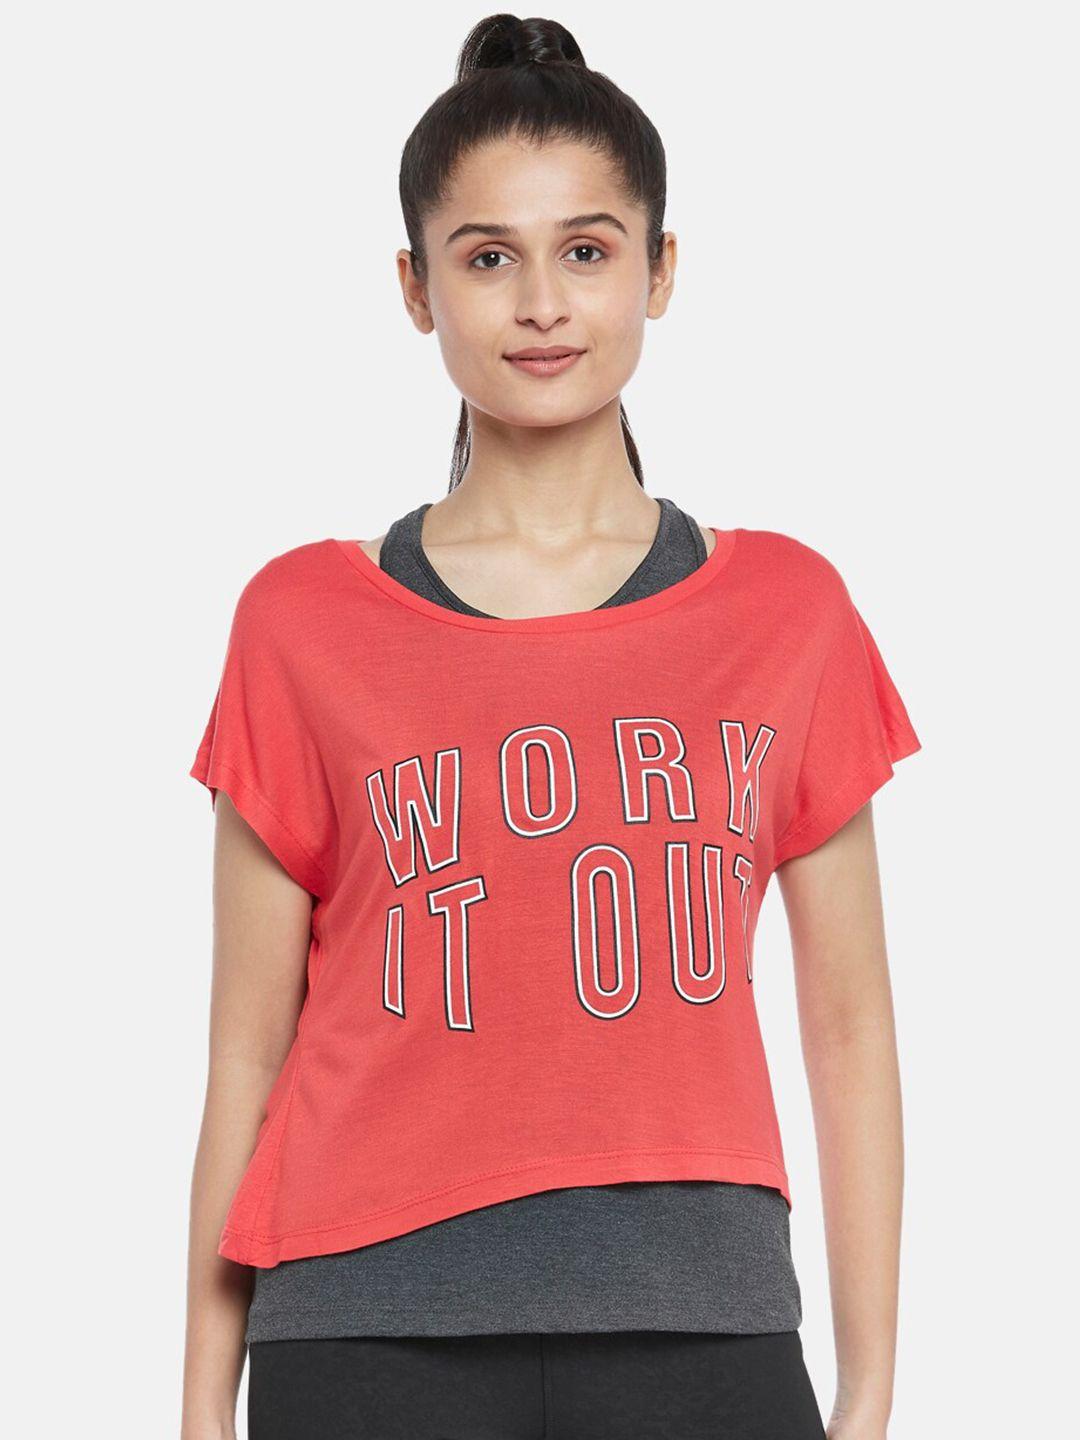 ajile by pantaloons red & grey pack of typography printed top and a tank top